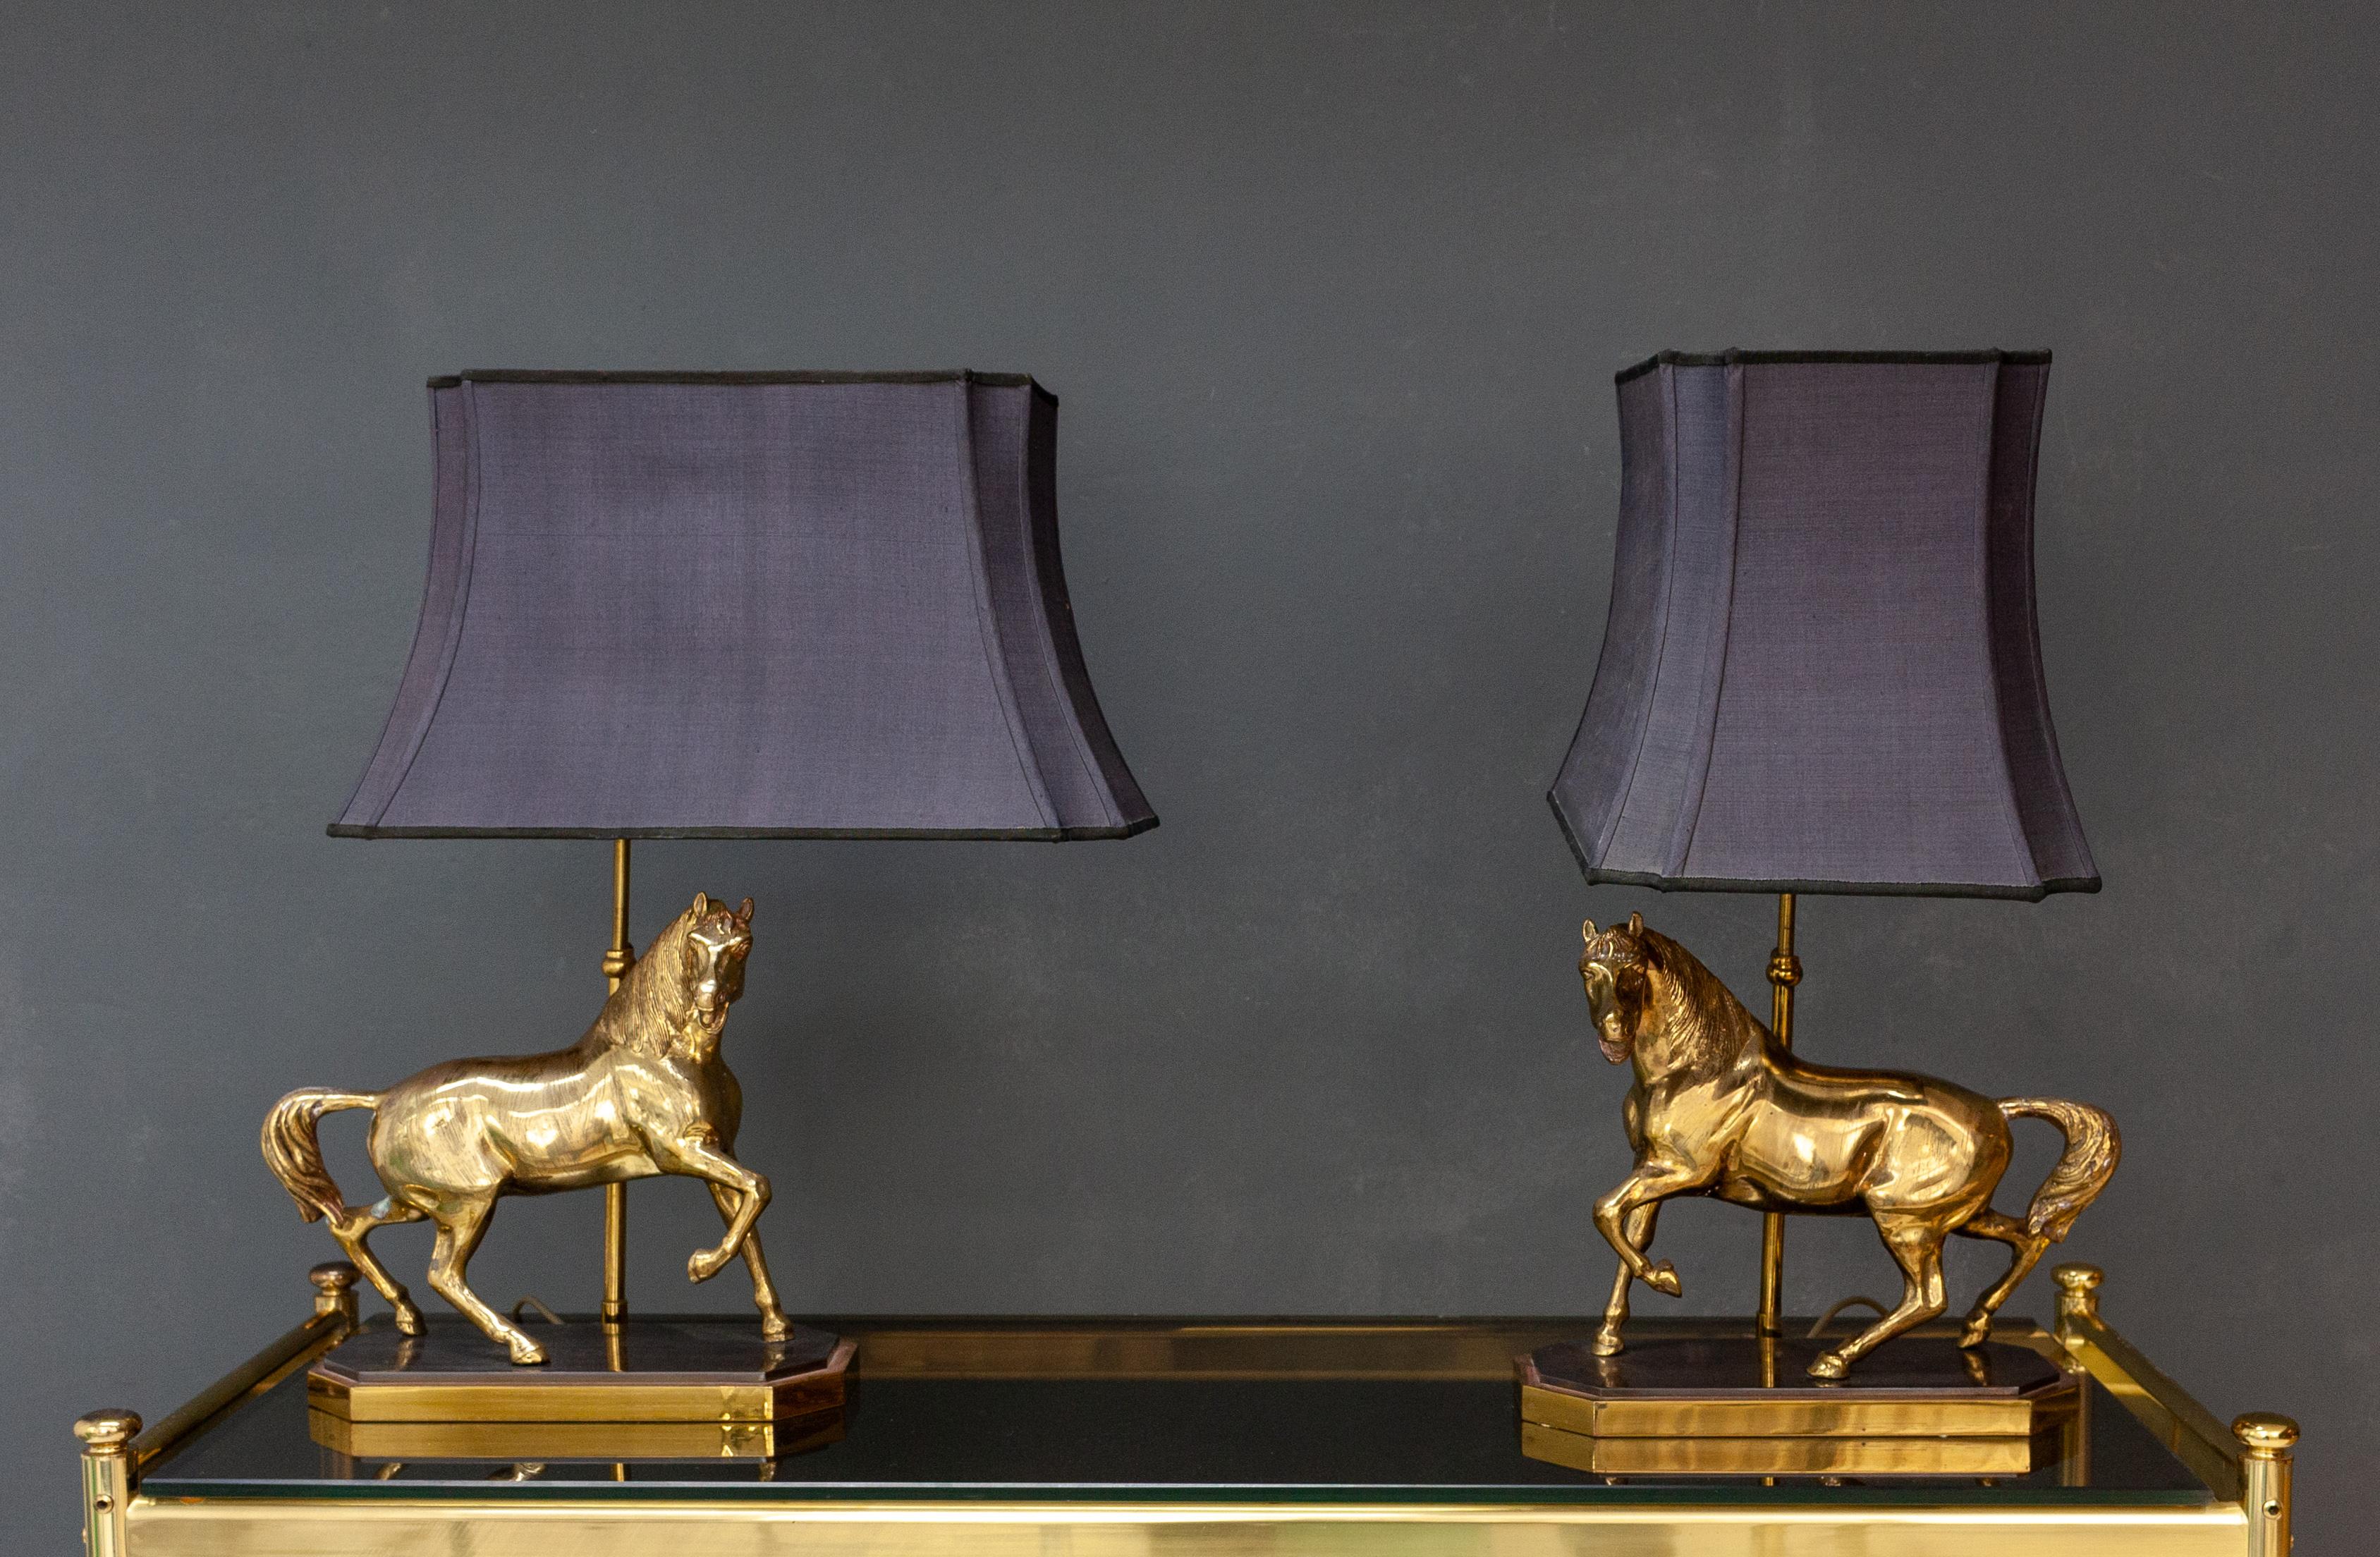 Love this superb set of table lamps. Brass horses on a bronze base. Very nicely made. With real movement in the horses. Two light points a piece.
In the manor of Maison Jansen ore Deknud Original dark Purple shades with gold interior.
The shades